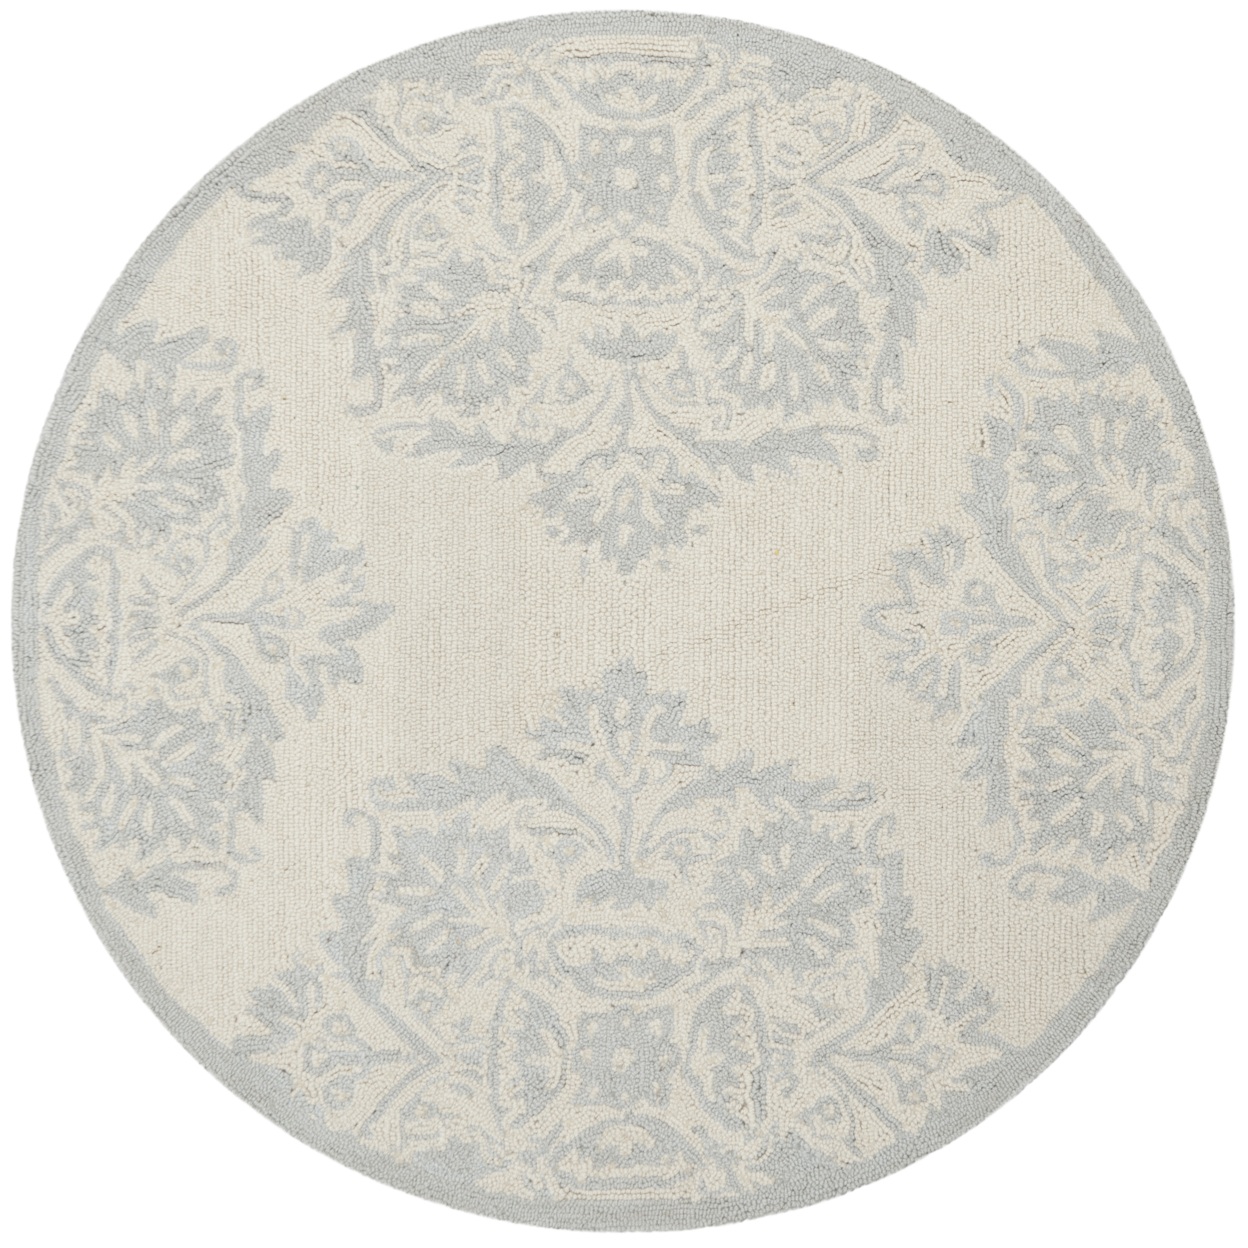 SAFAVIEH Chelsea HK359A Hand-hooked Ivory / Blue Rug - 7' 6 X 9' 6 Oval